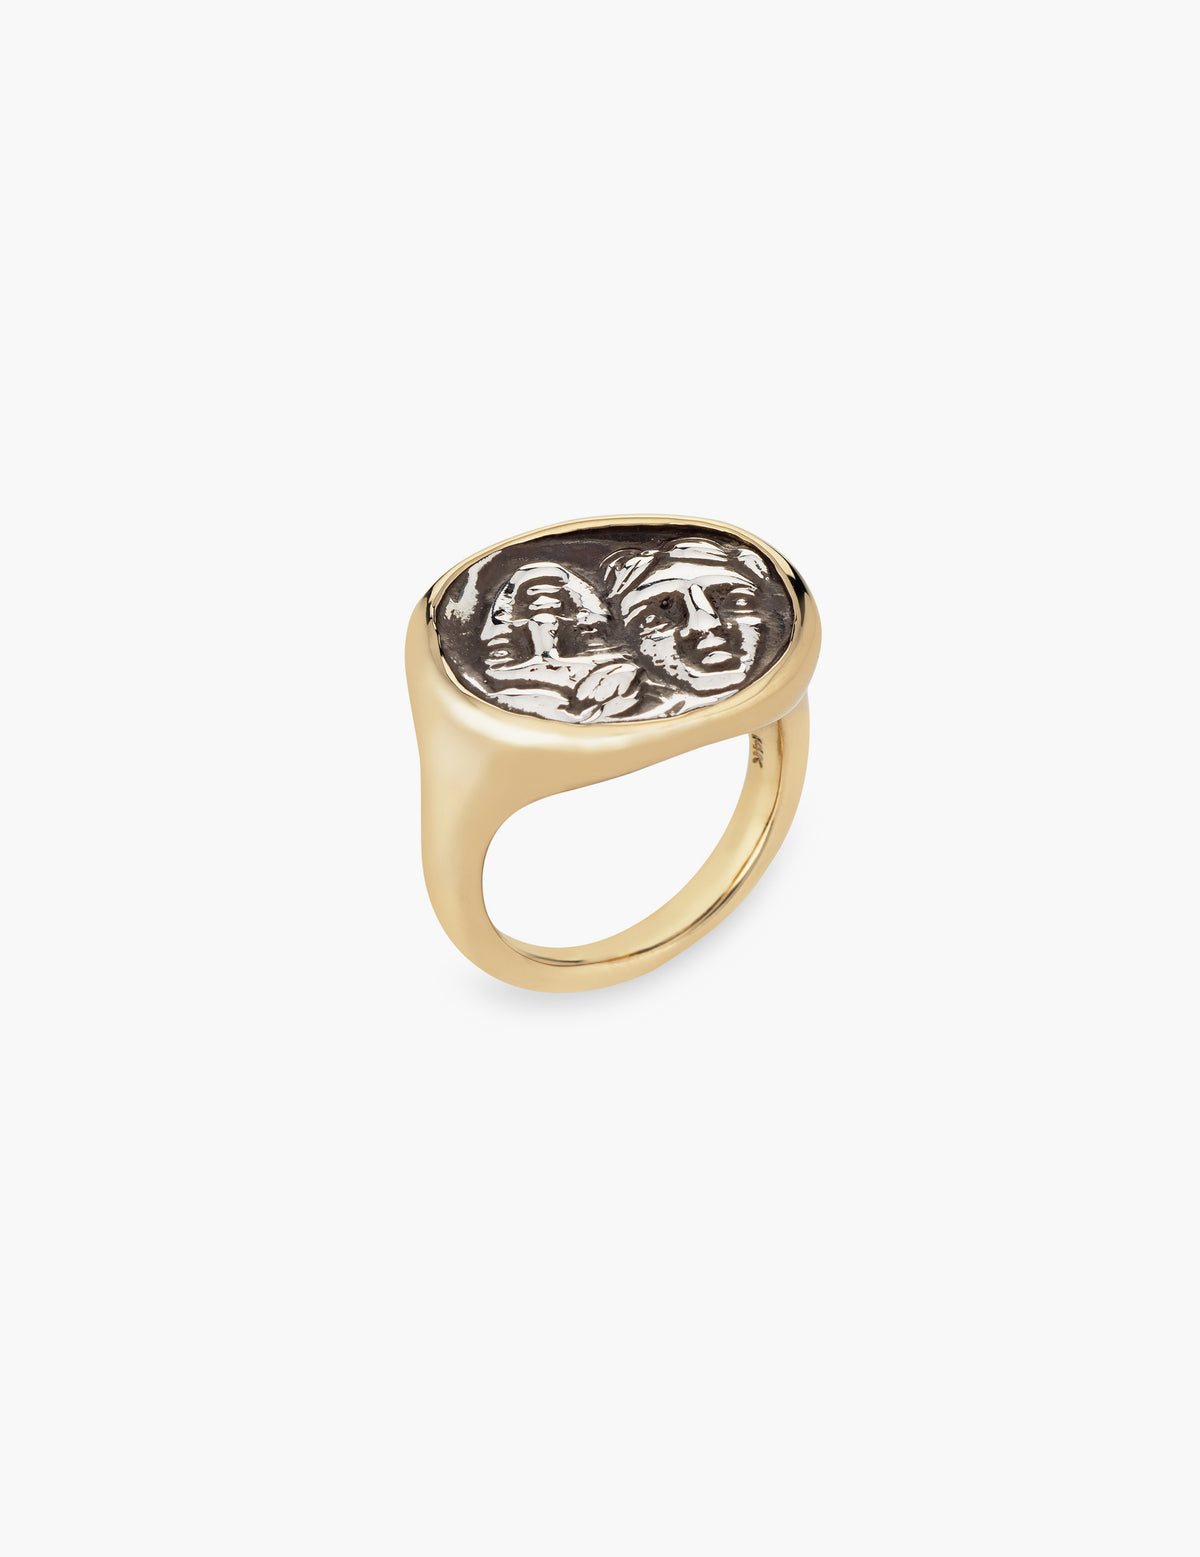 Large Gemini Coin Ring in Gold and Sterling Silver